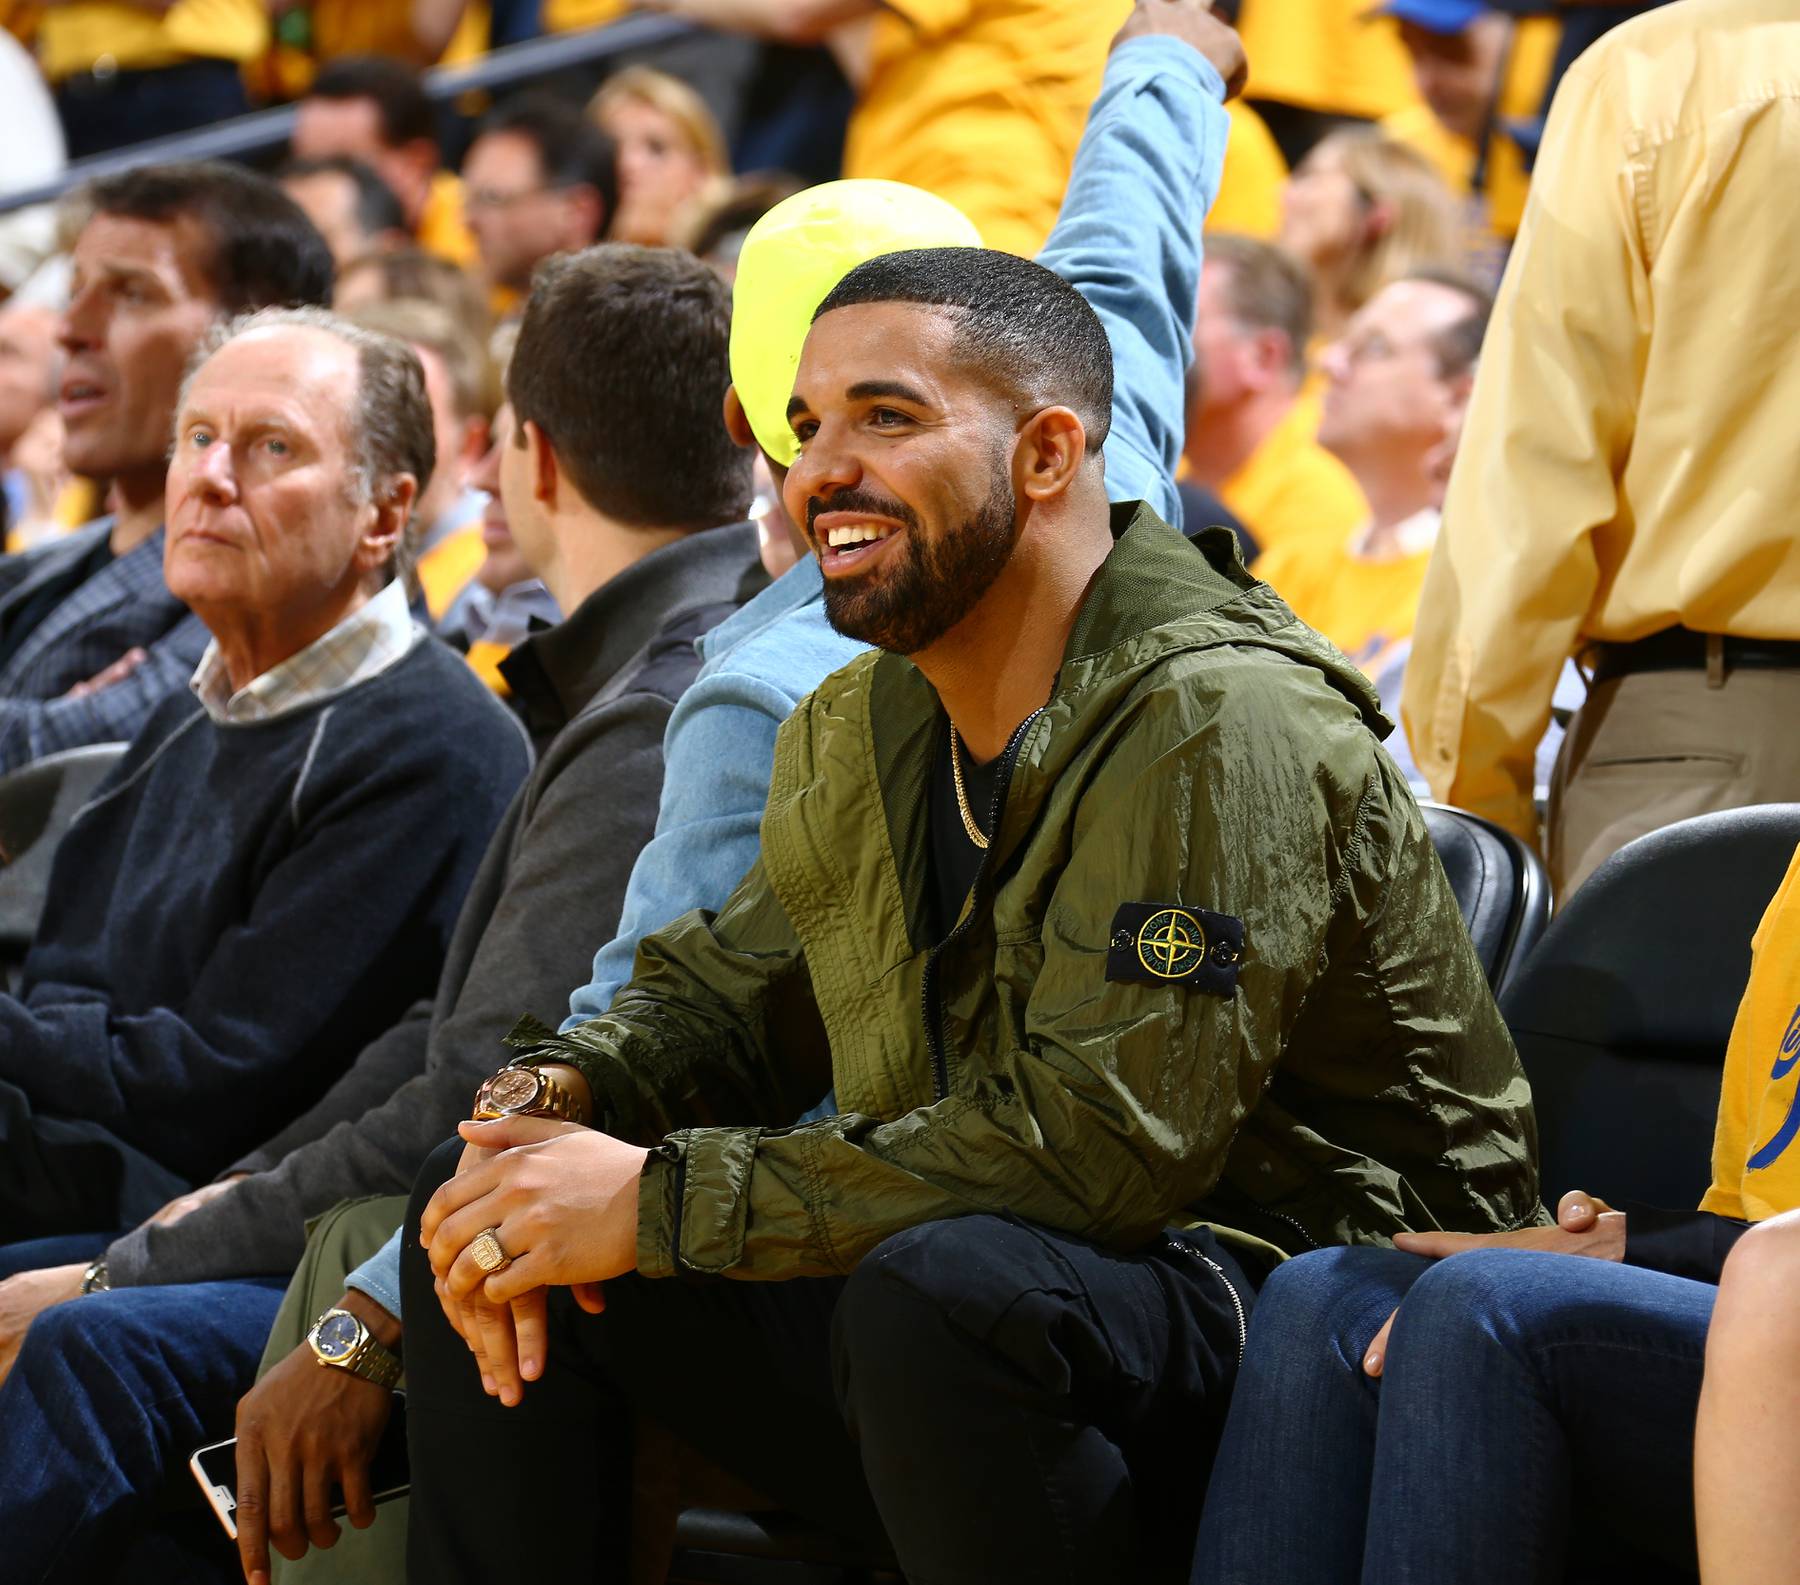 Canadian rapper Drake, one of Stone Island and Moncler's most prominent clients, attends the 2016 NBA finals wearing Stone Island. Getty Images.